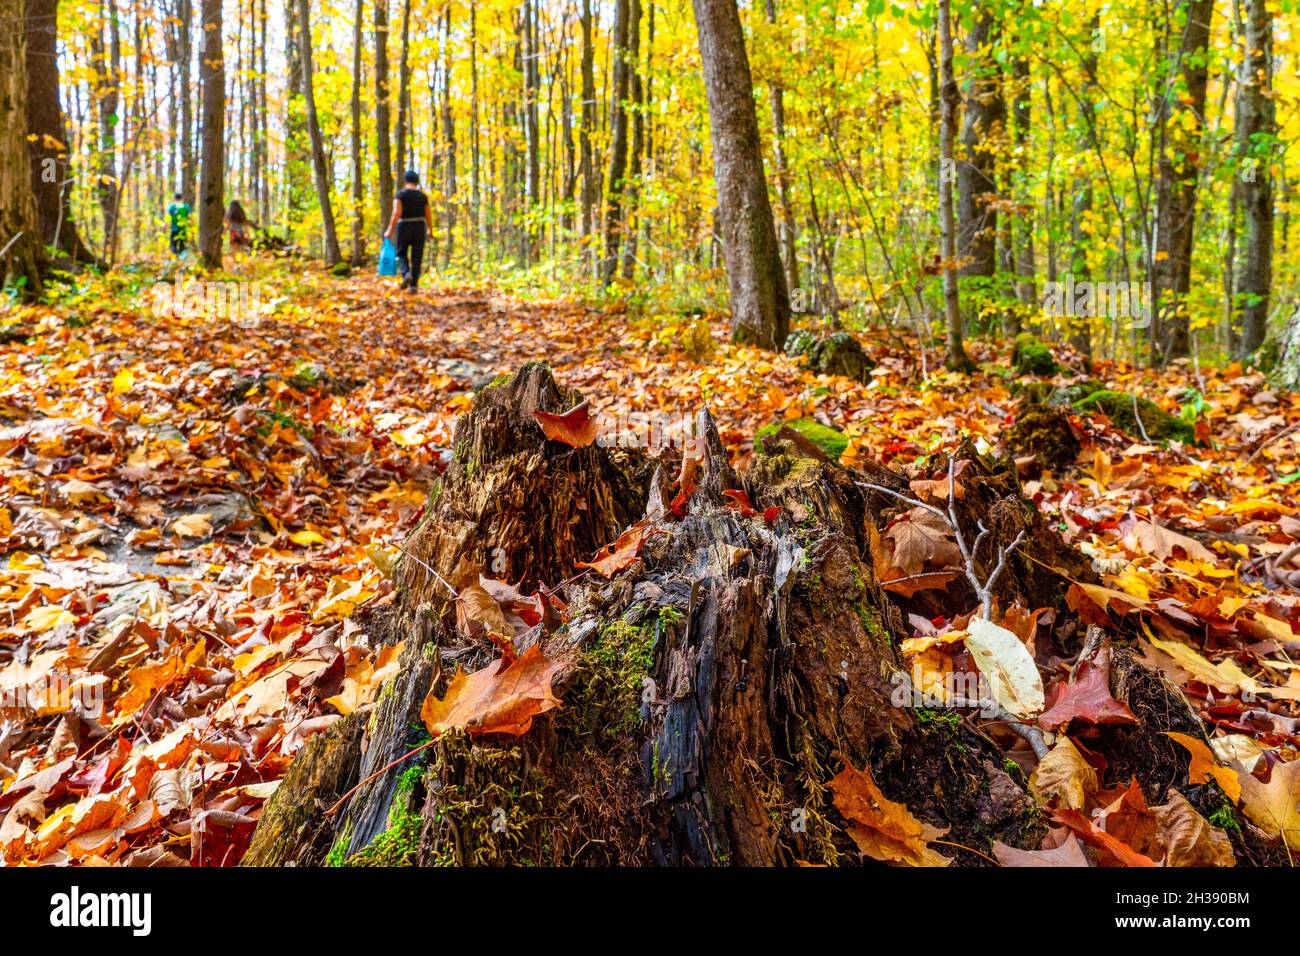 A rotten stump covered with moss among fallen red-brown foliage, and mushroom pickers walk in the distance Stock Photo